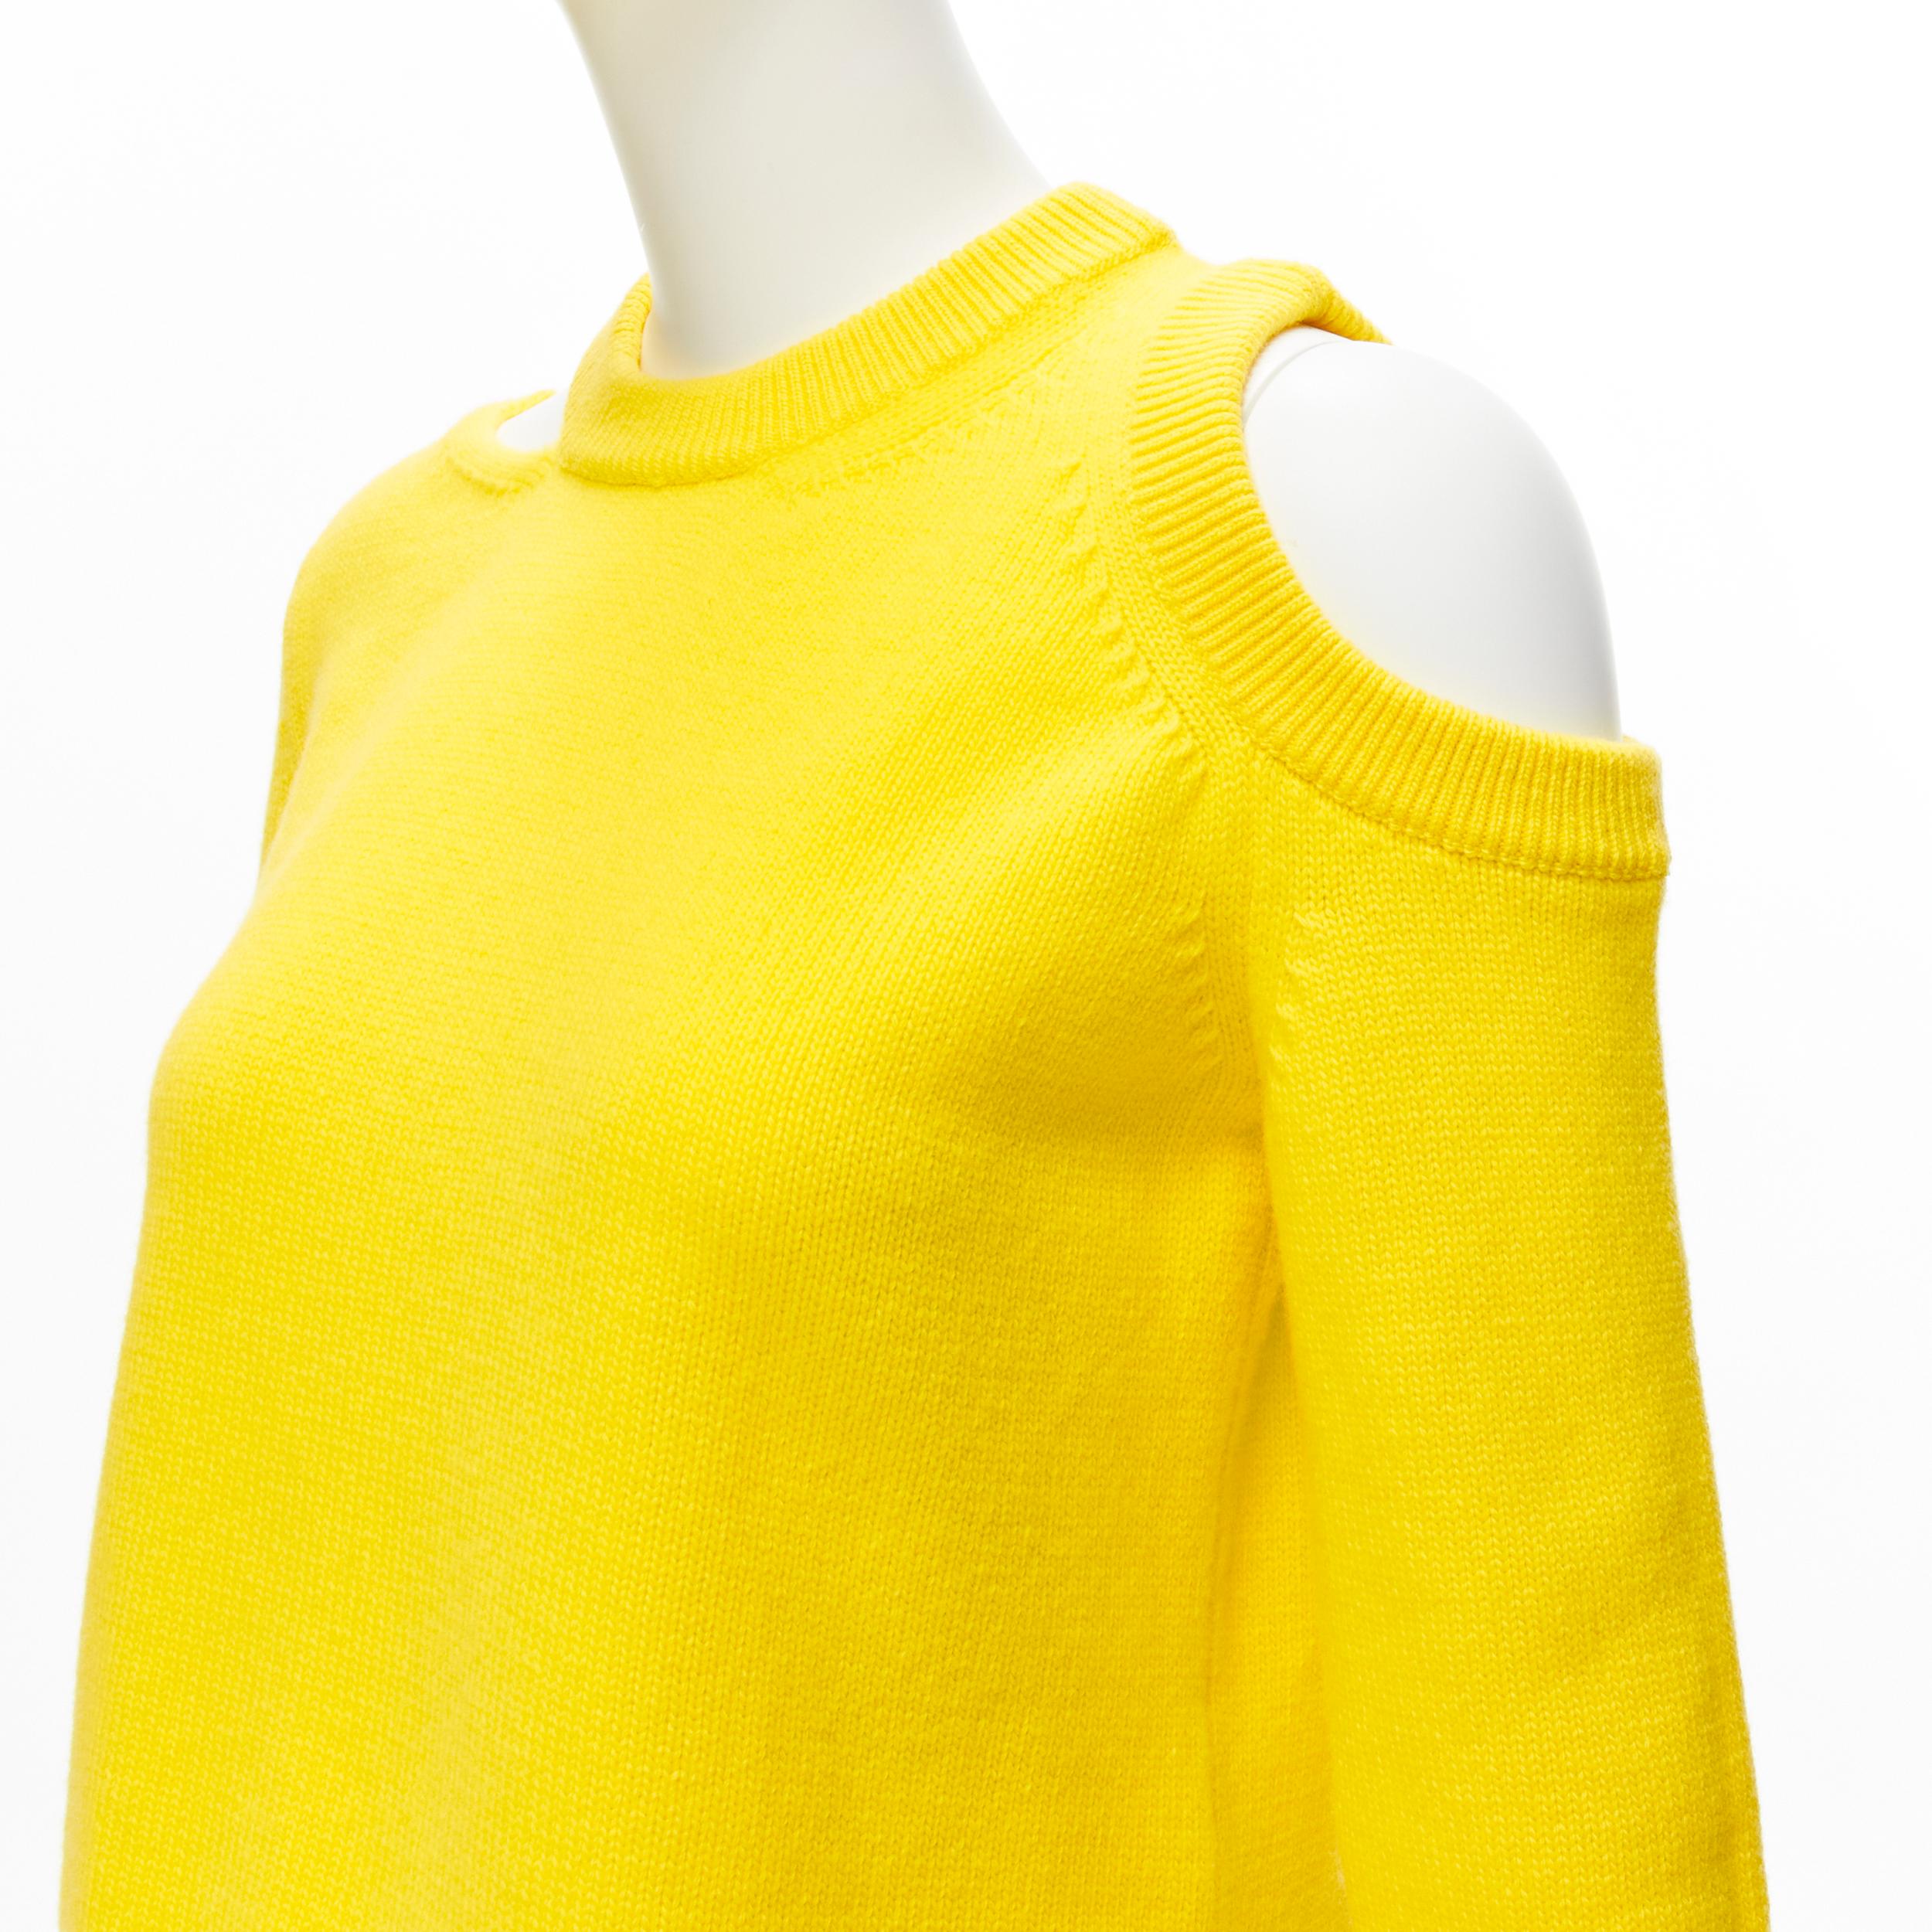 ALEXANDER MCQUEEN 2022 yellow wool blend asymmetric cold shoulder sweater S
Reference: AAWC/A00470
Brand: Alexander McQueen
Designer: Sarah Burton
Collection: 2022
Material: Wool, Blend
Color: Yellow
Pattern: Solid
Closure: Pullover
Extra Details: